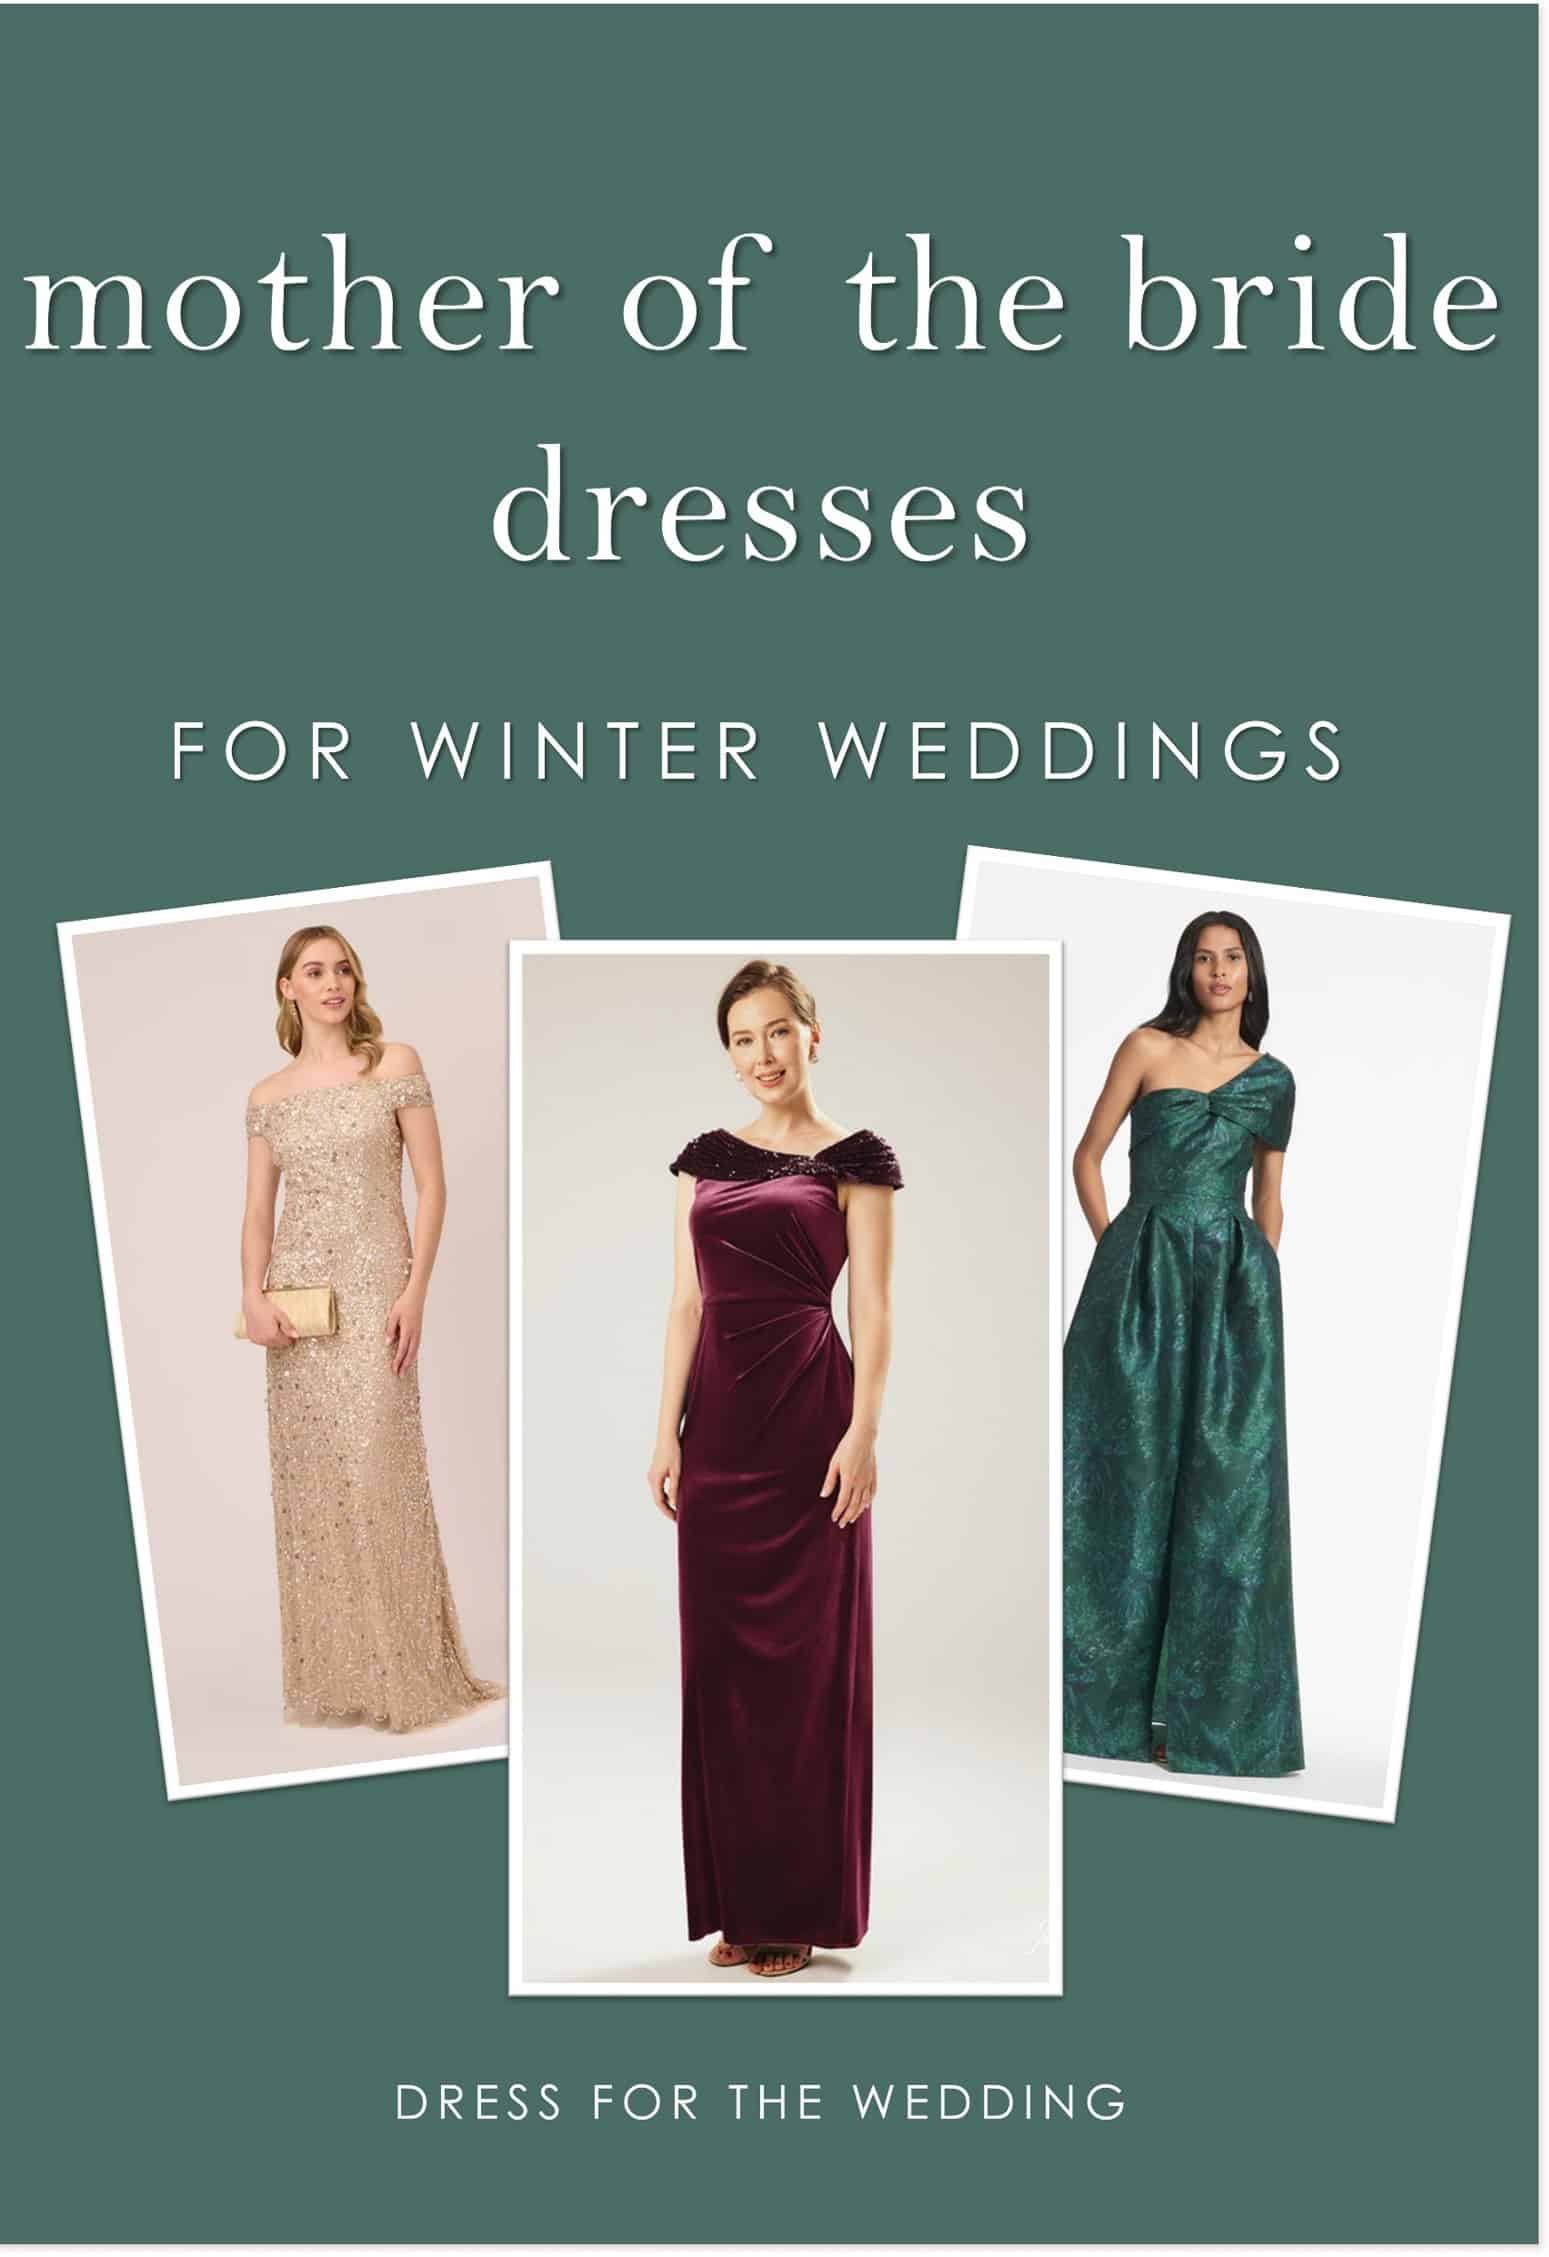 The Best Winter Mother of the Bride Dresses - Dress for the Wedding